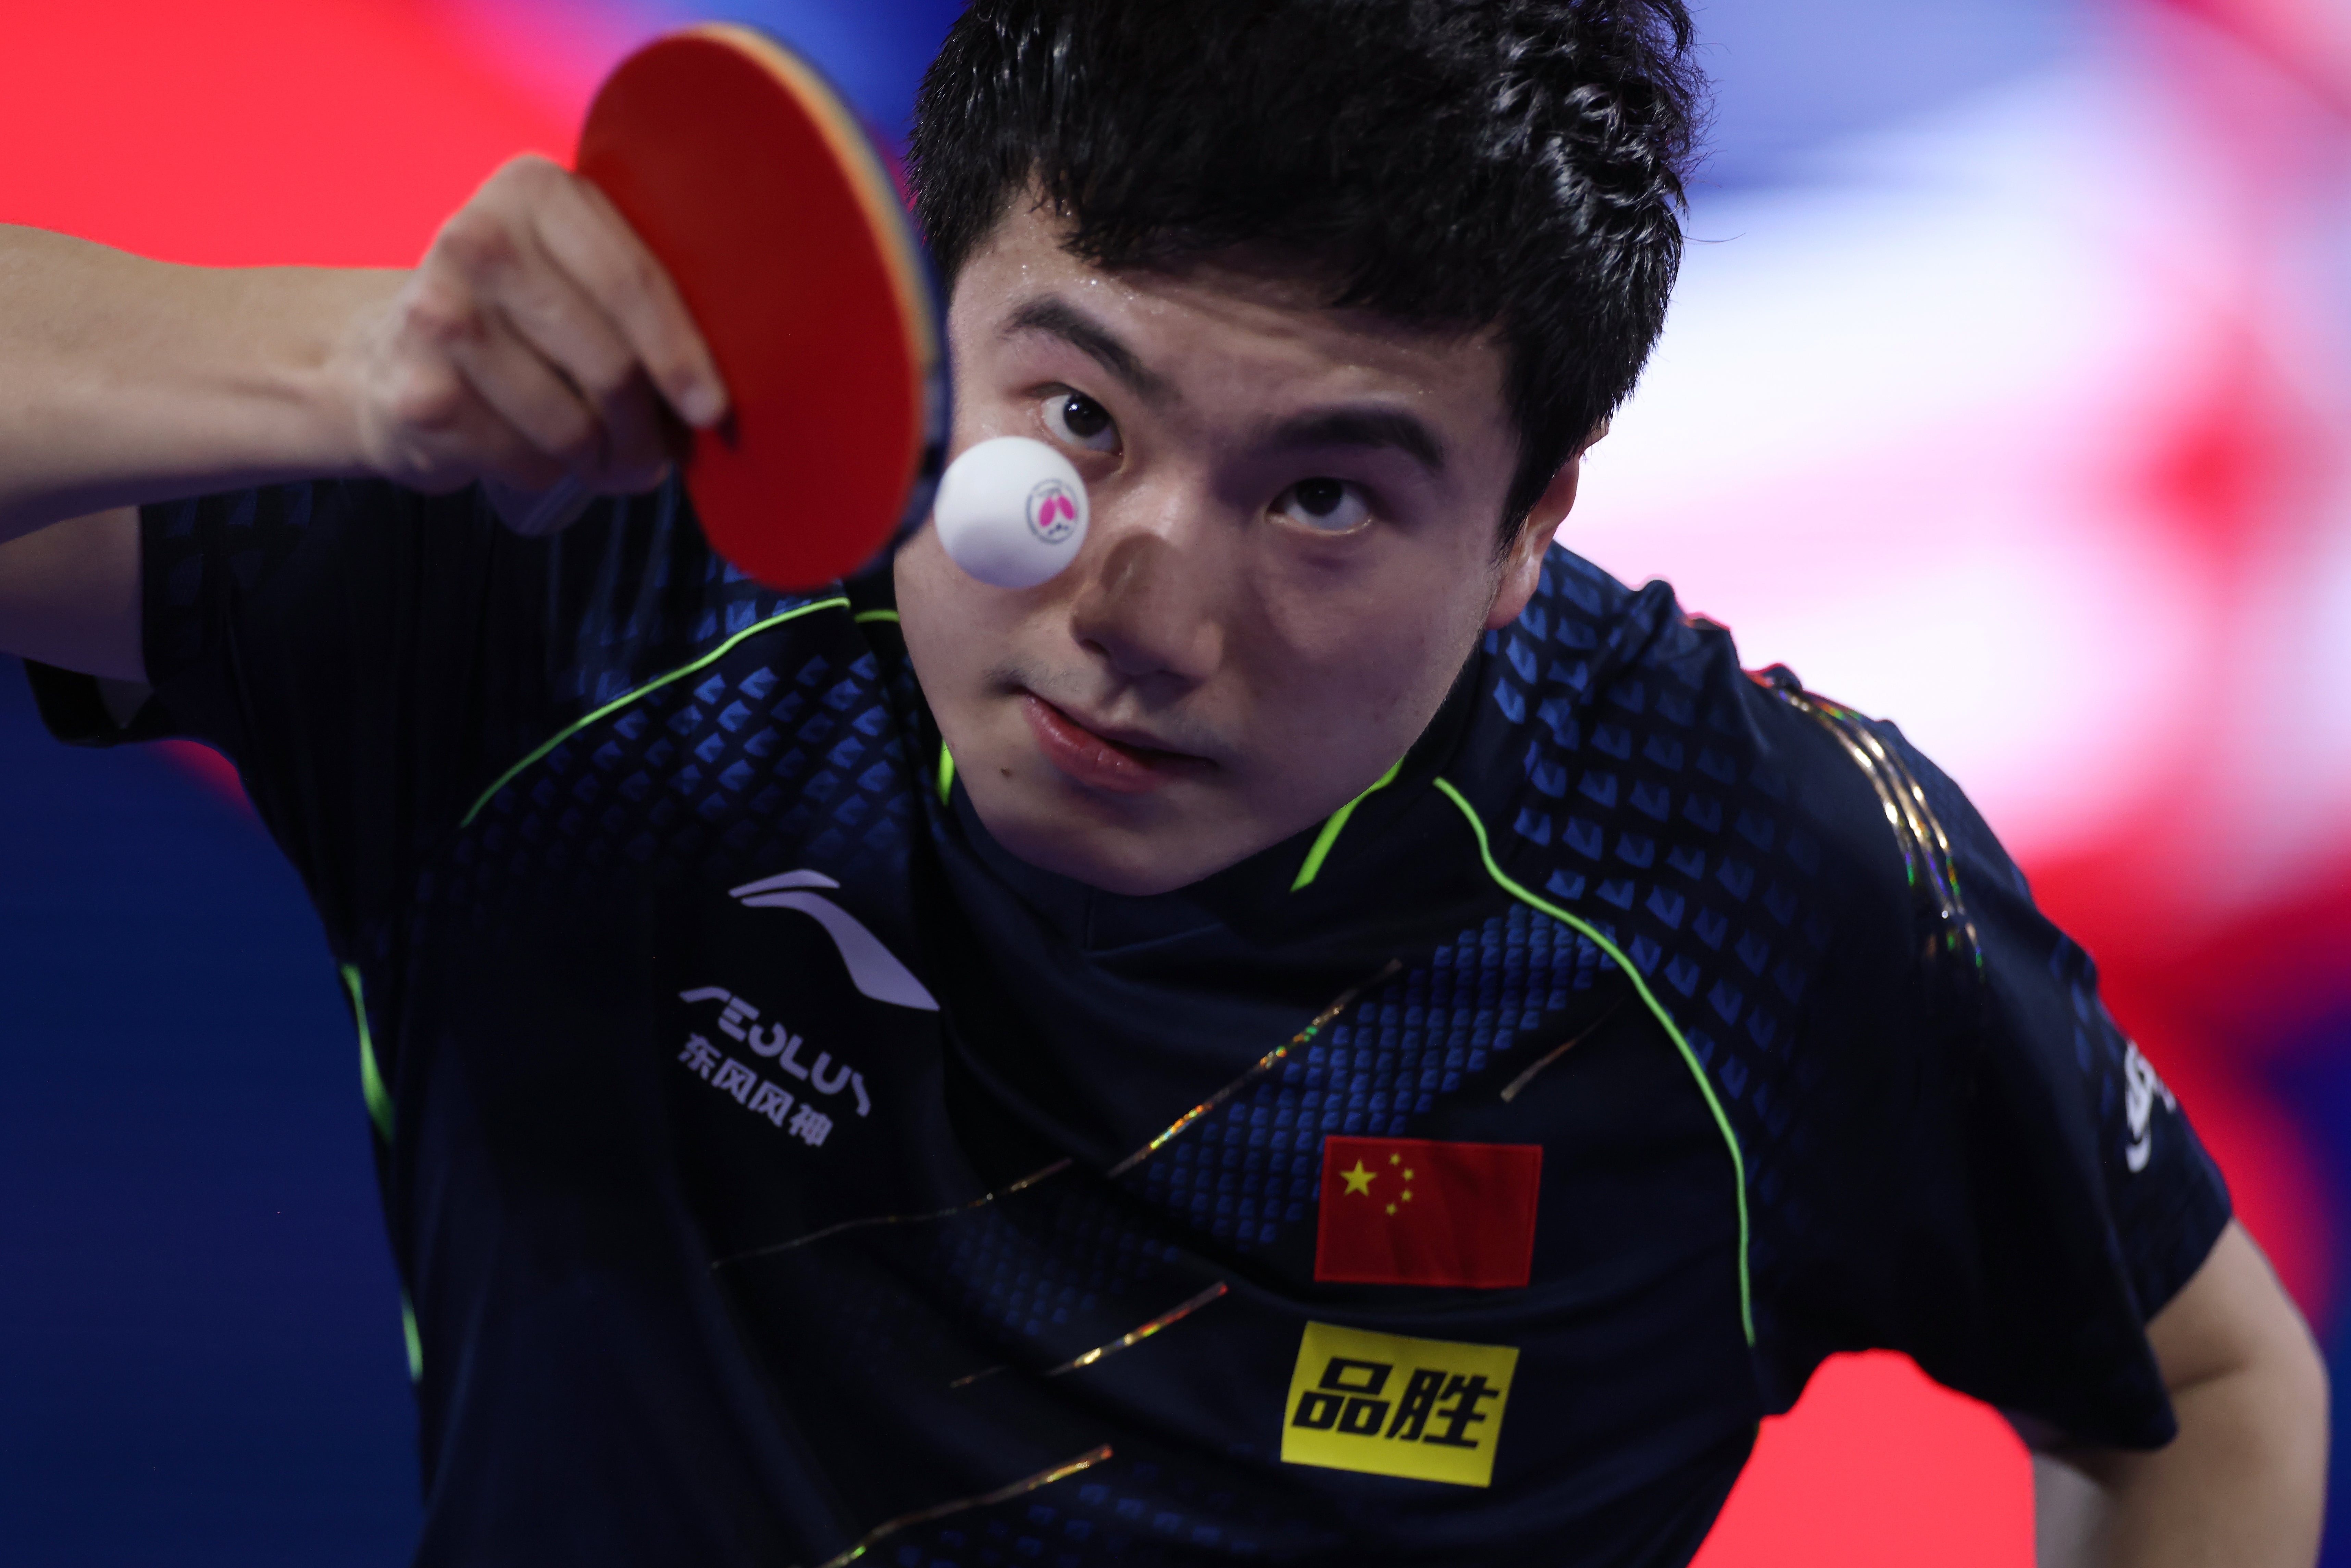 Table tennis chiefs vow to take action after racist incident during match The Independent